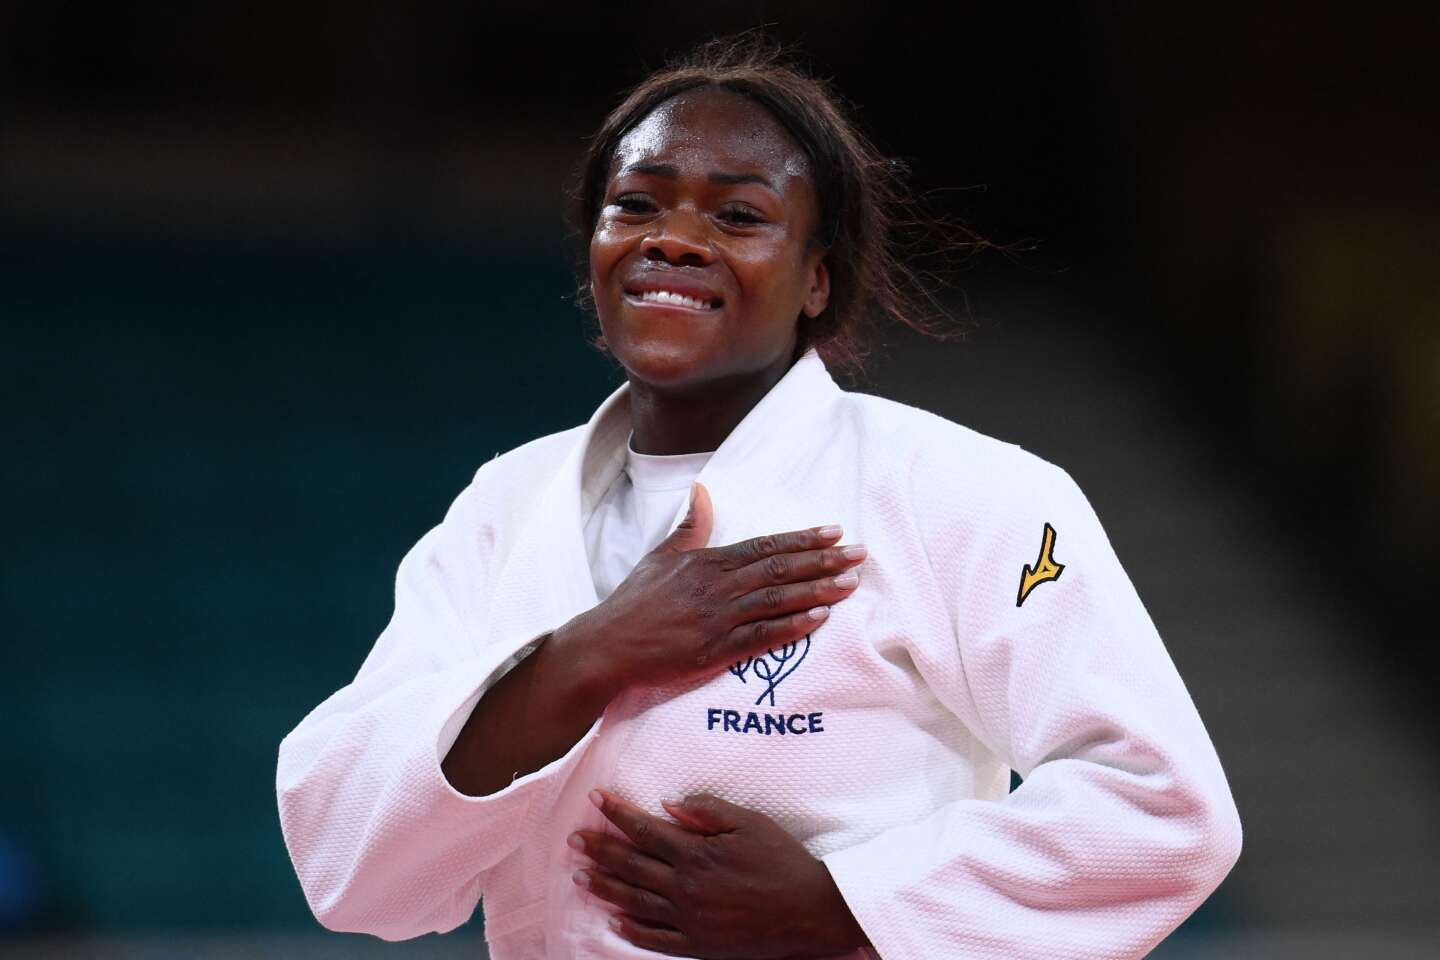 the reasons for the conflict between Clarisse Agbégnénou and her federation  - time.news - Time News